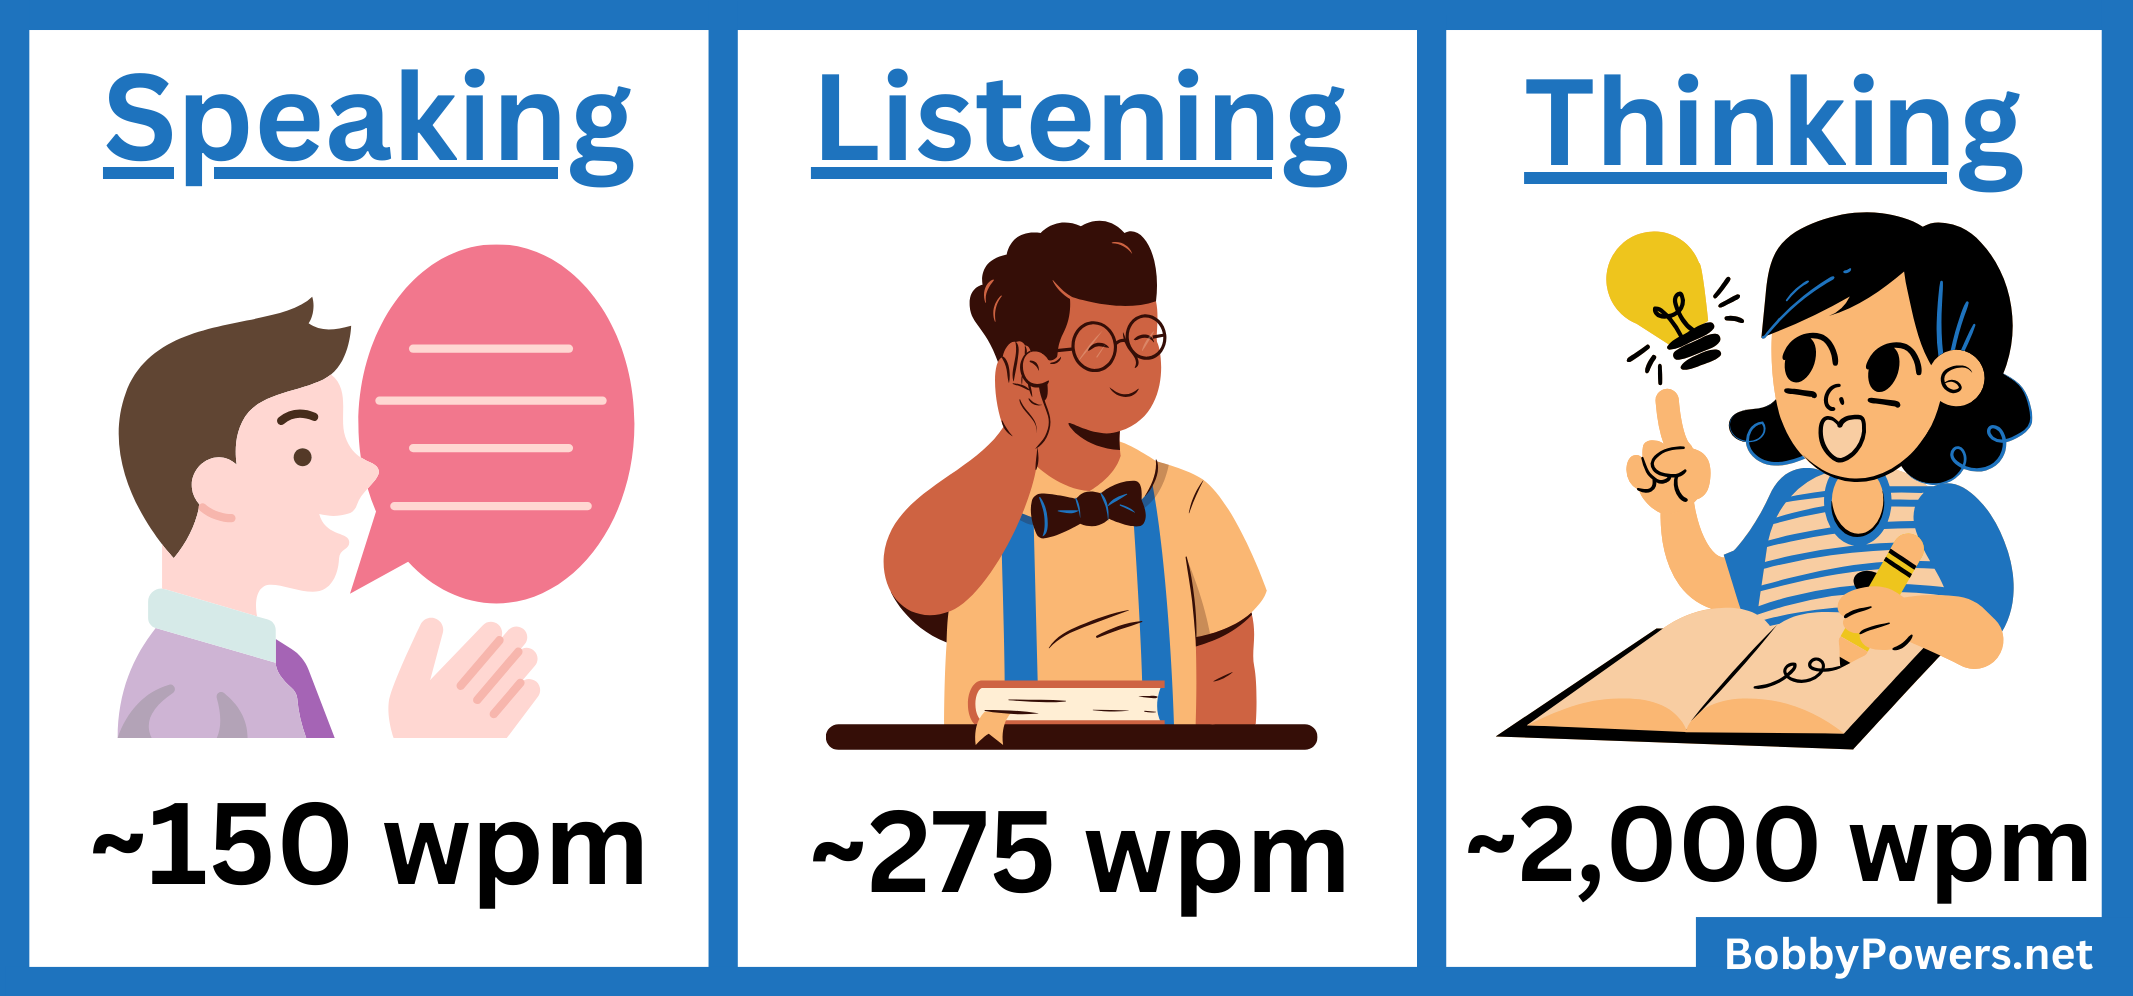 What Makes Listening So Difficult (shorter)